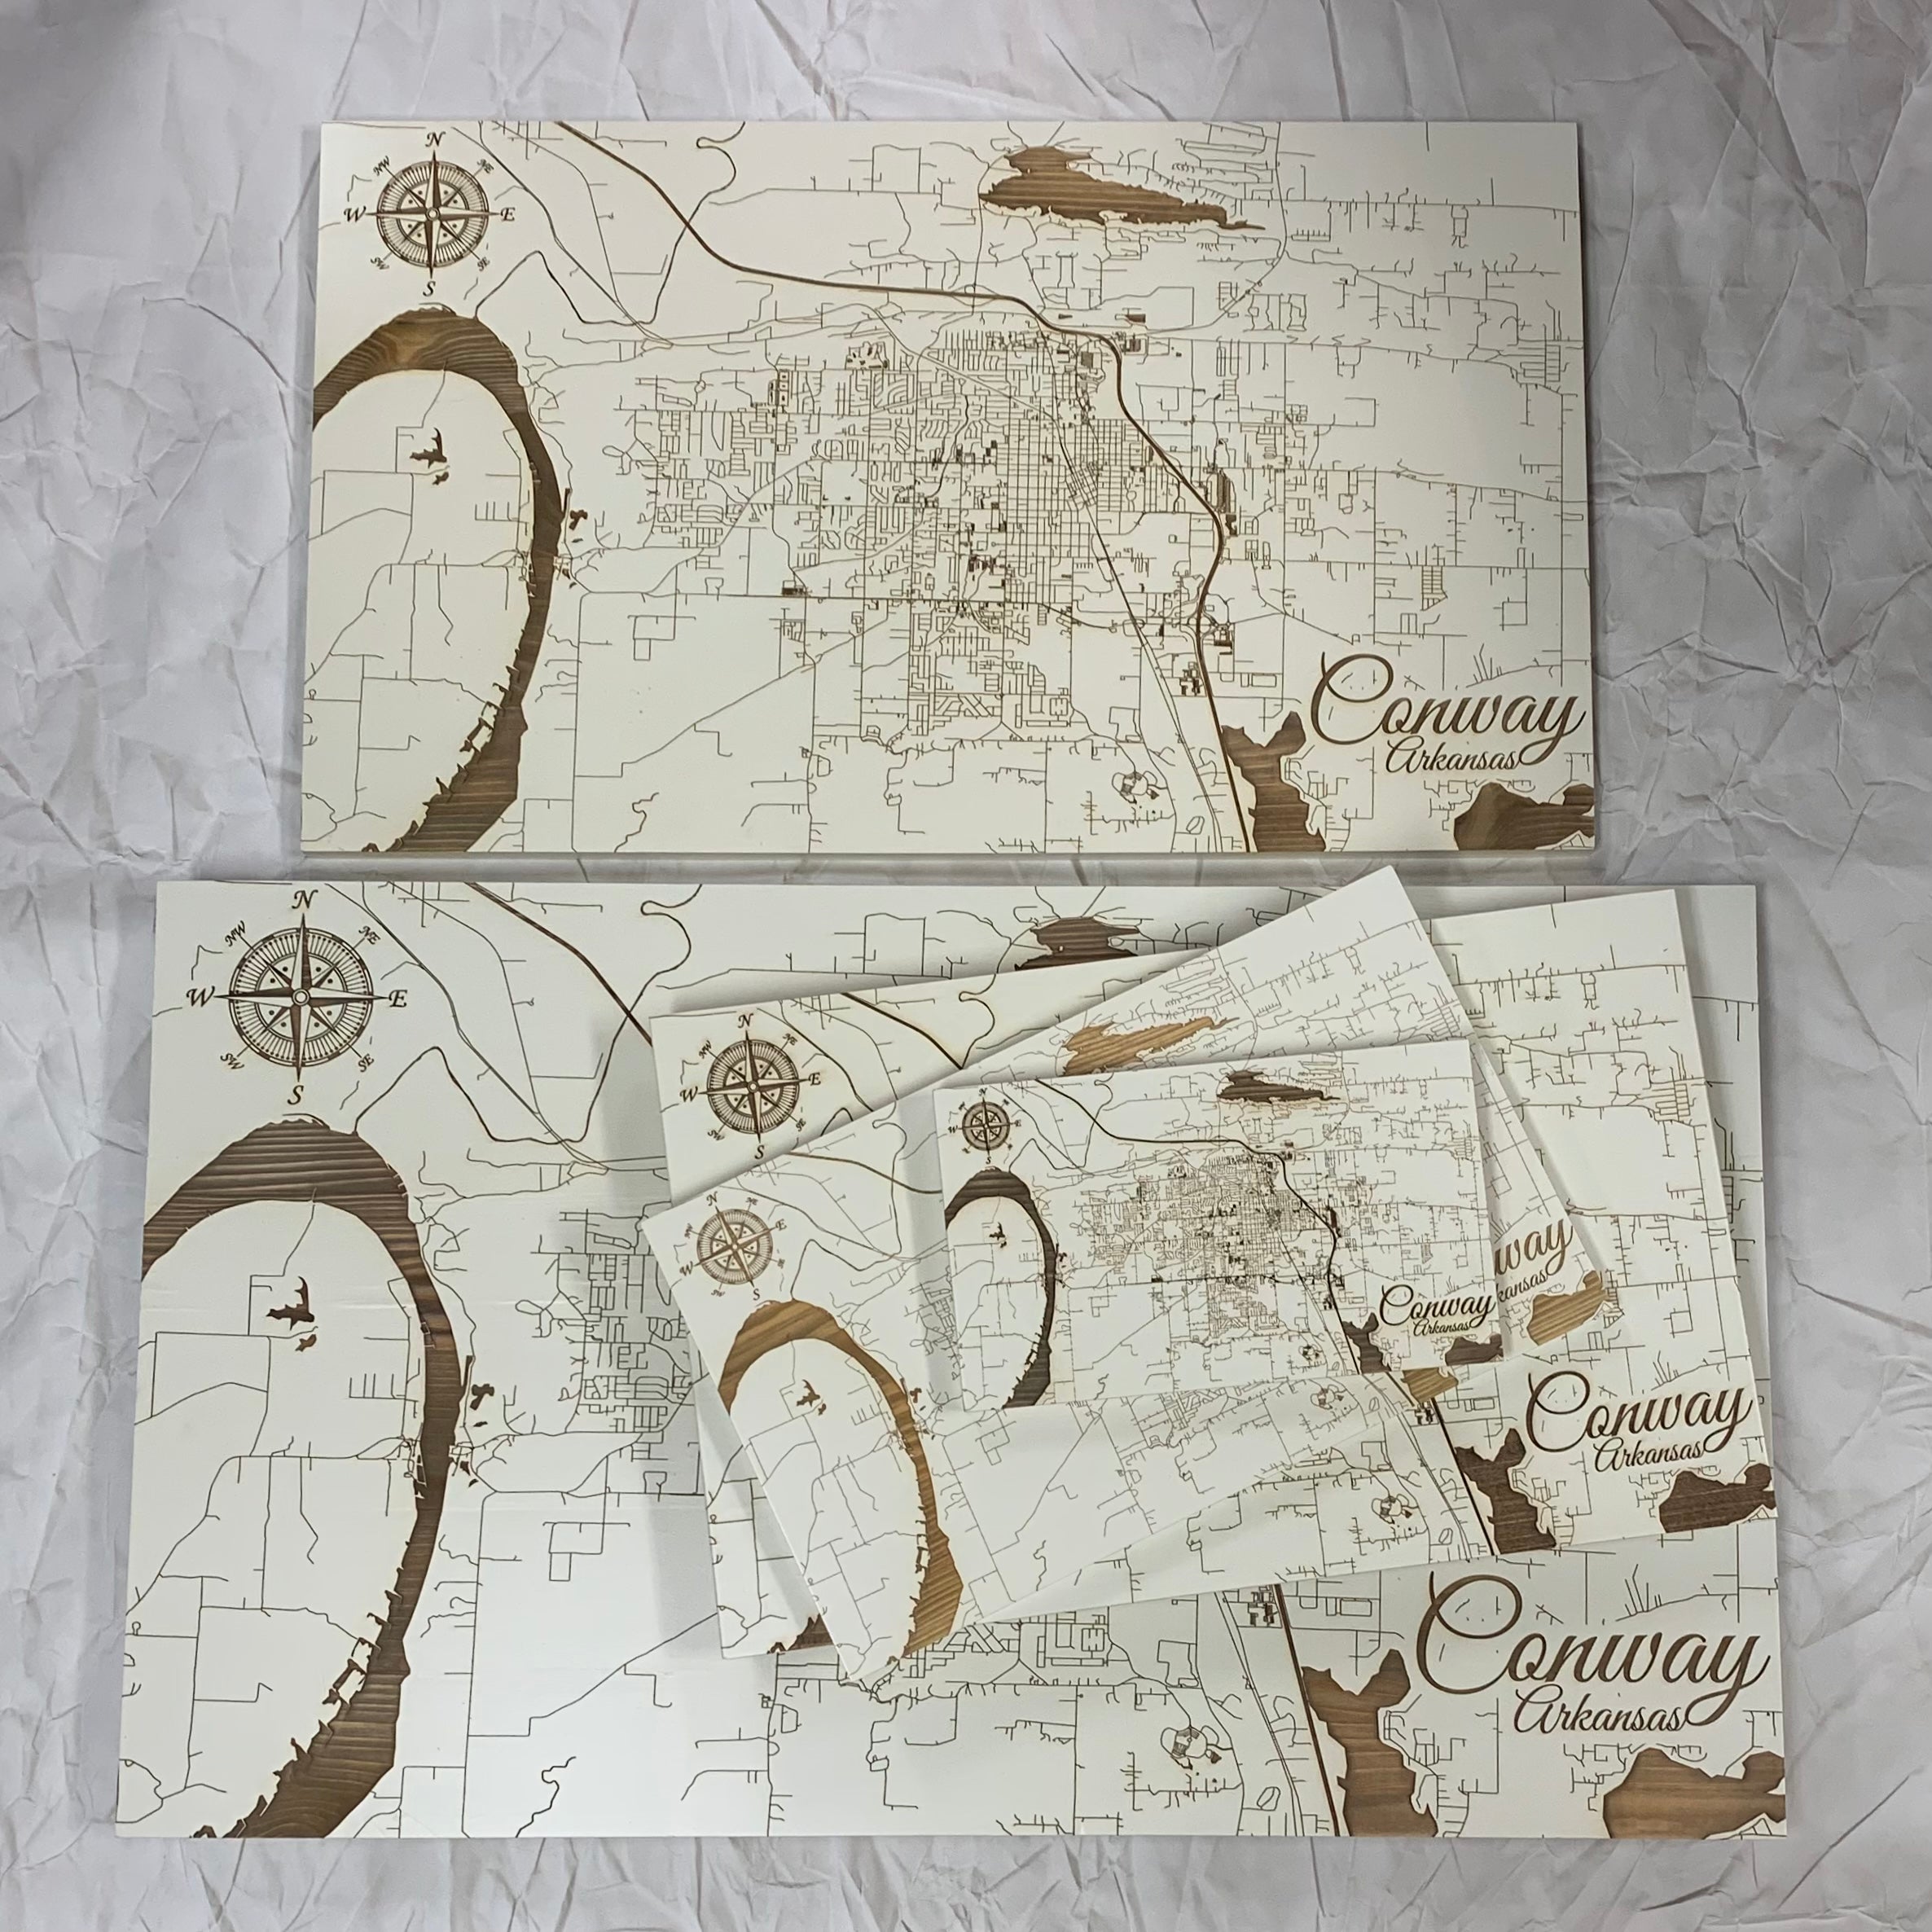 View Fire & Pine - Burnt Wood Map of Conway, Ivory - Small, 11.25" x 19"